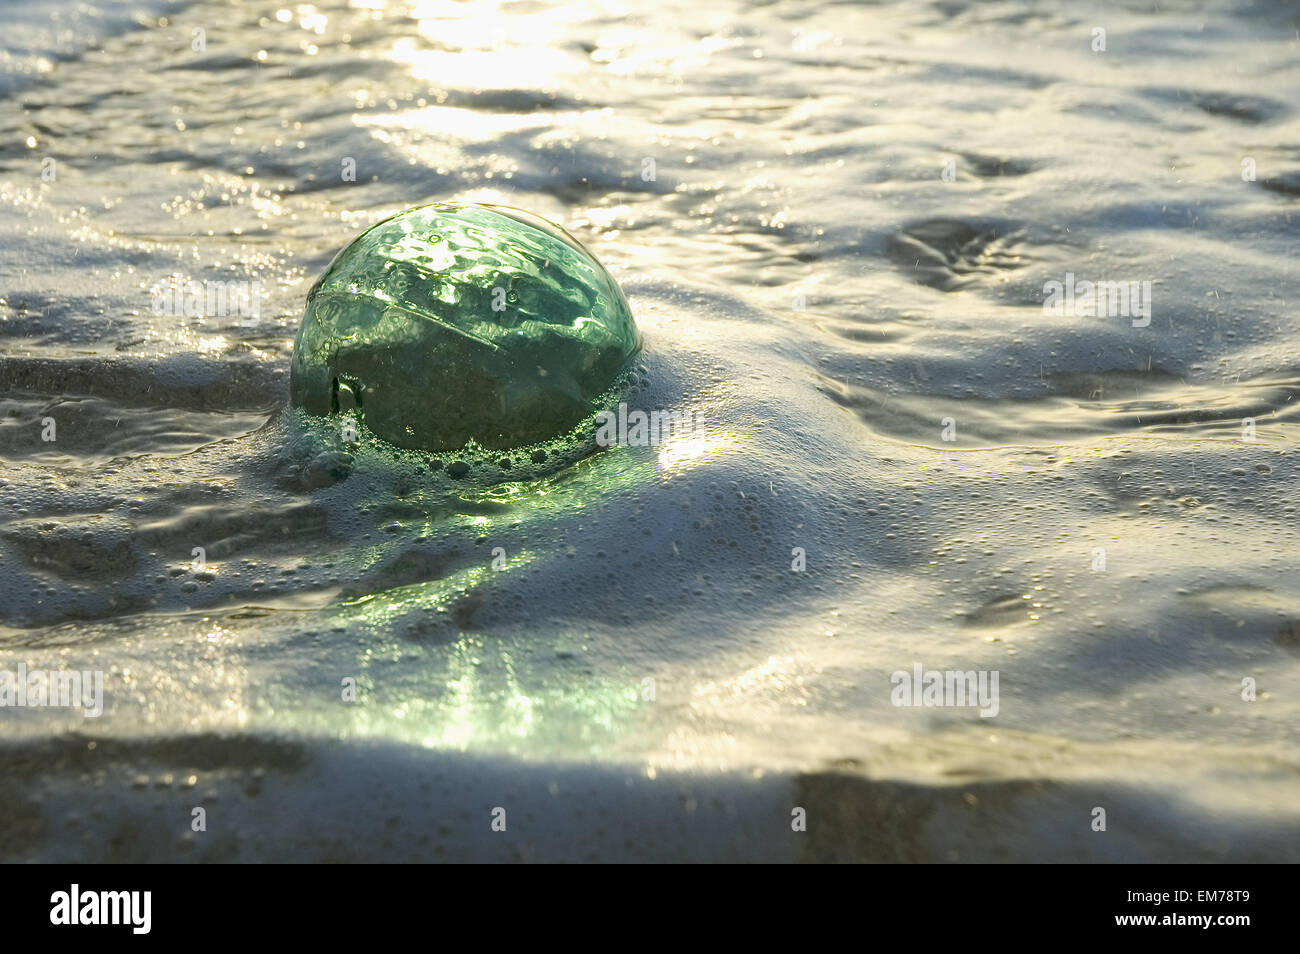 A Glass Fishing Ball Floats In Shallow Water, Bright Reflections